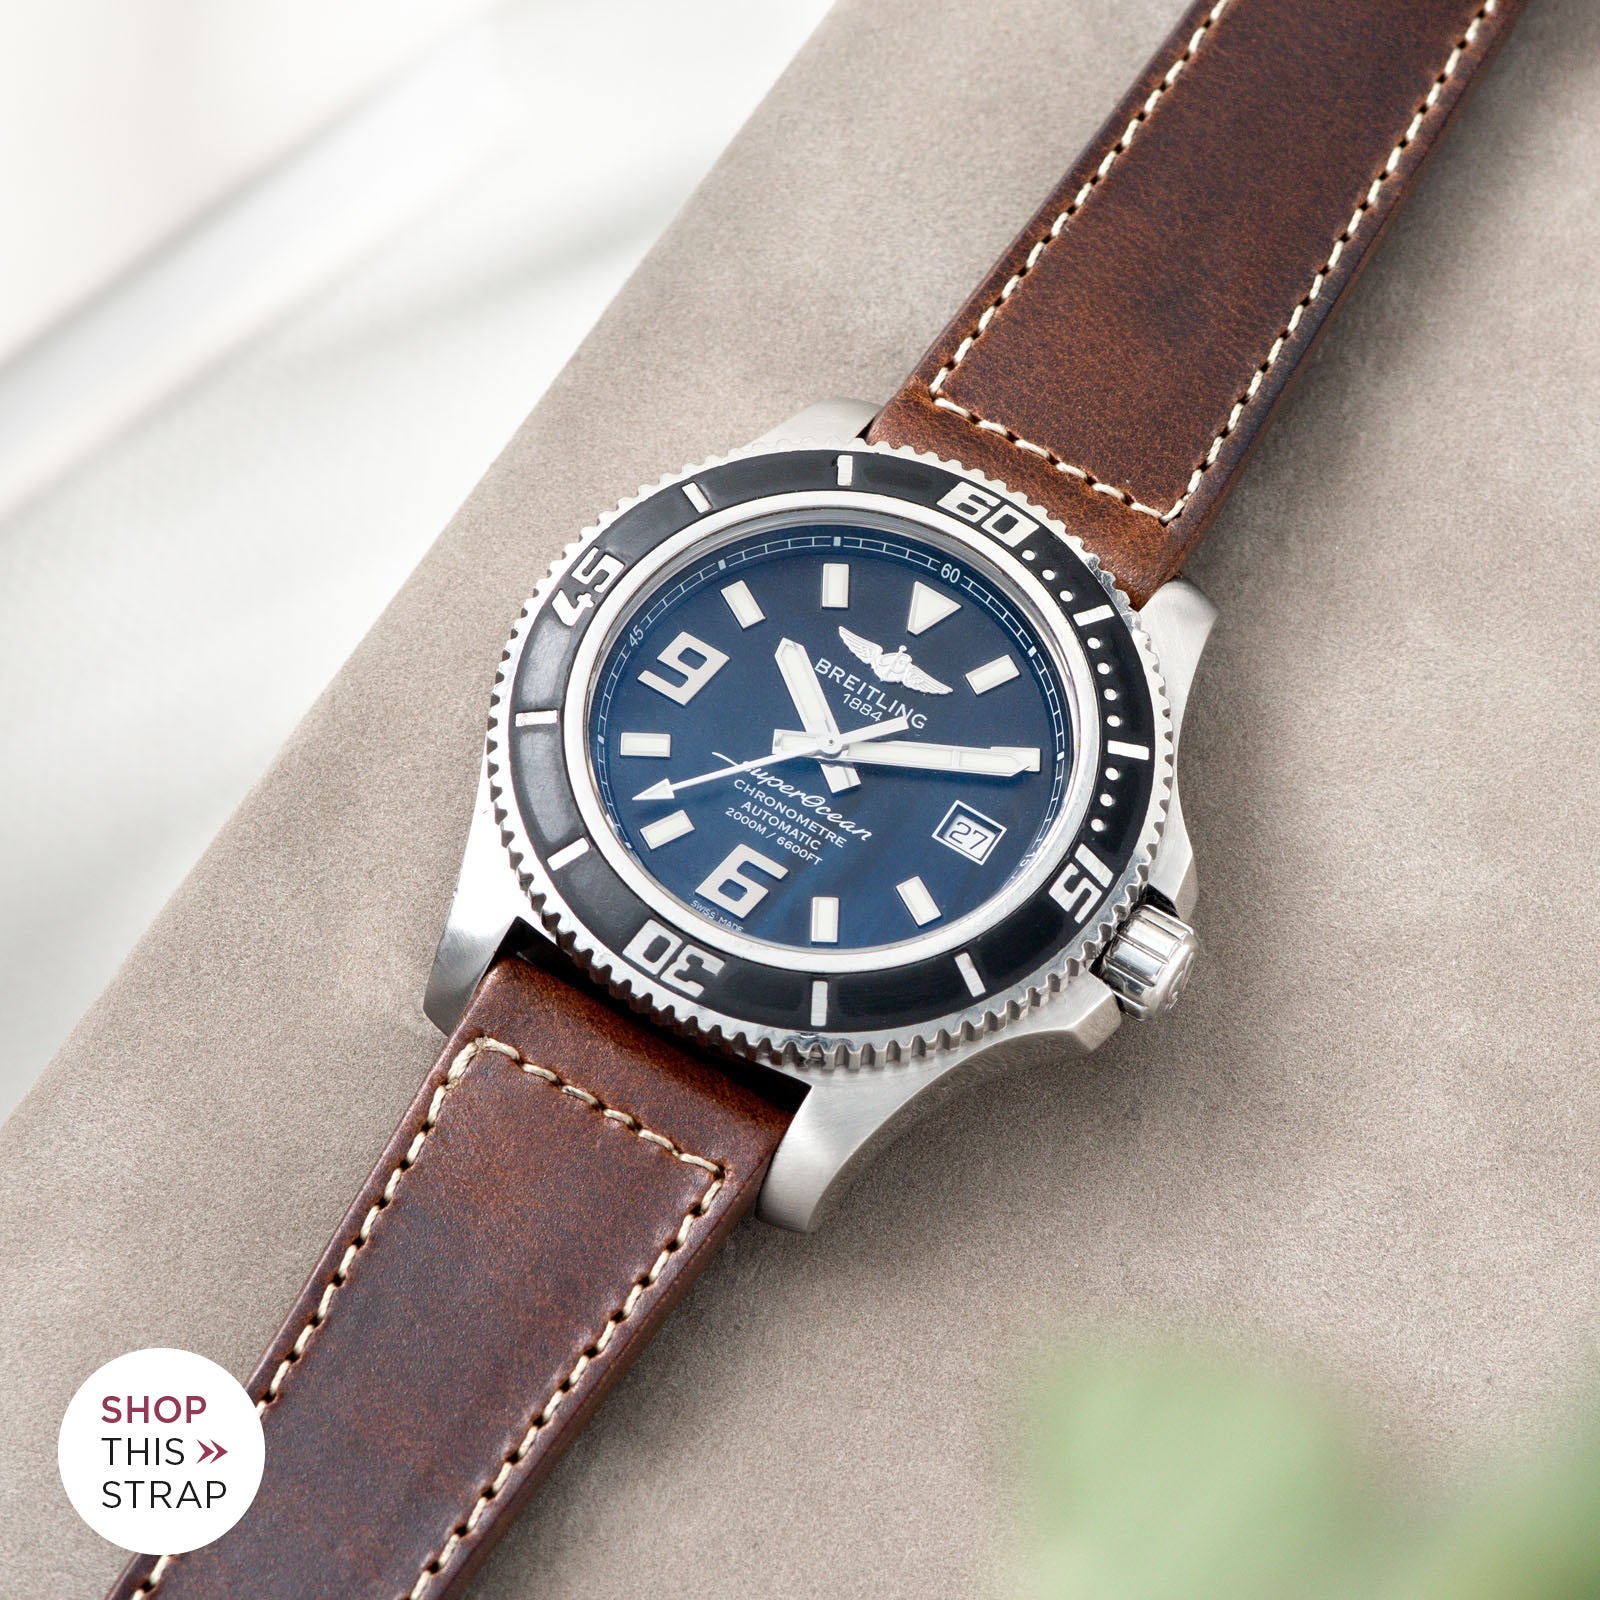 Bulang and Sons_Strap Guide_Breitling Superocean 44_Siena Brown Boxed Stitch Leather Watch Strap